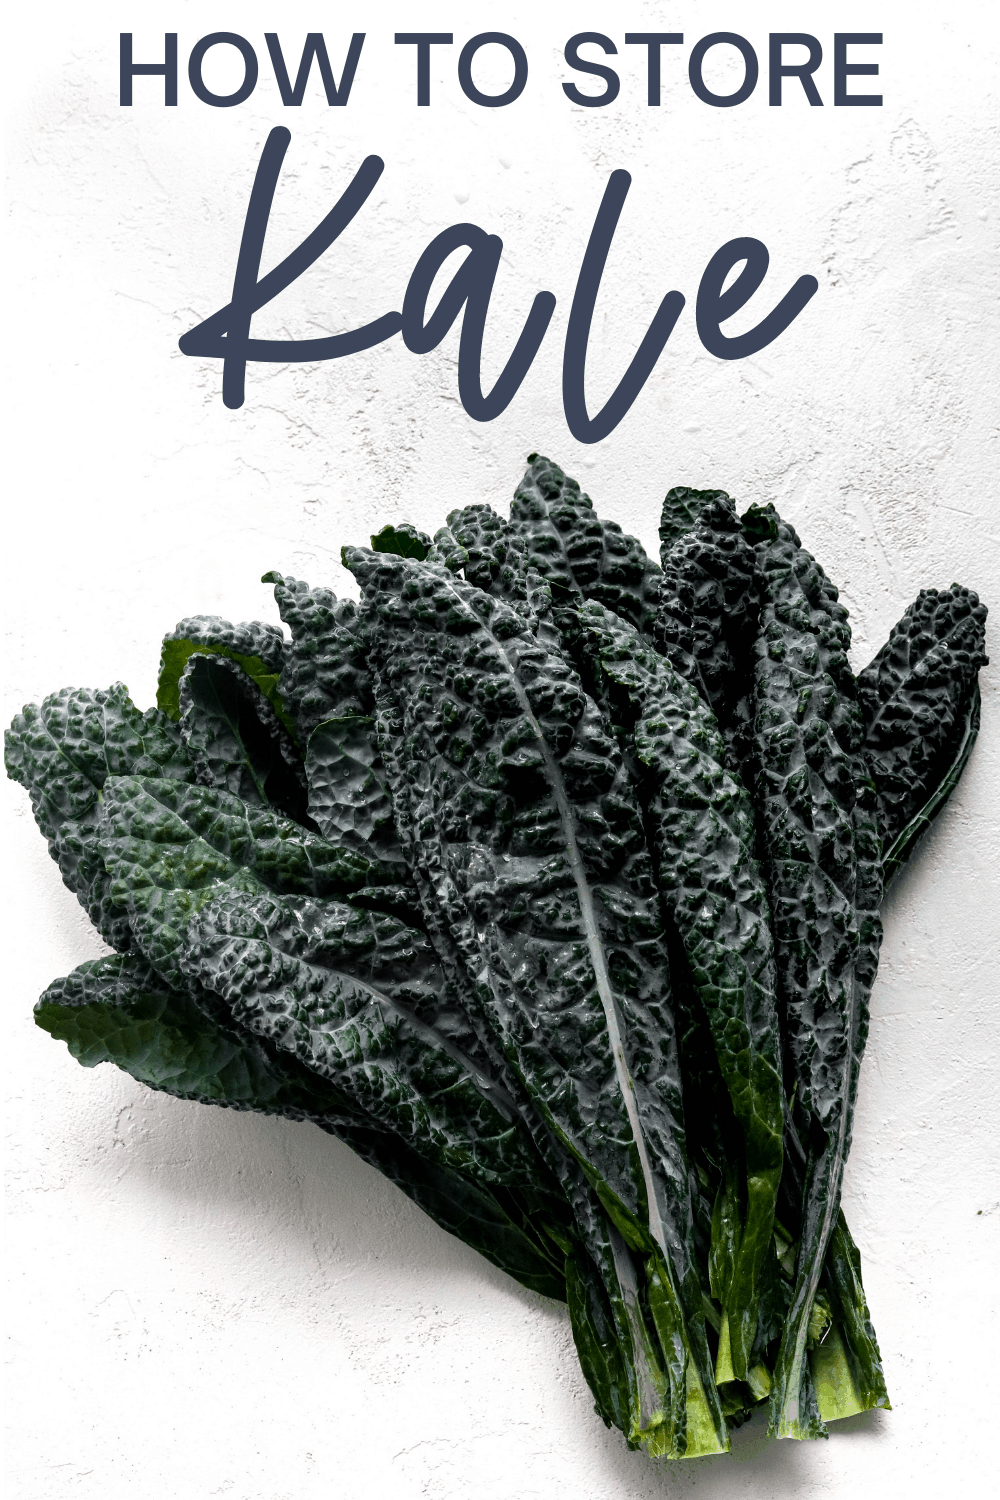 HOW TO STORE KALE 2